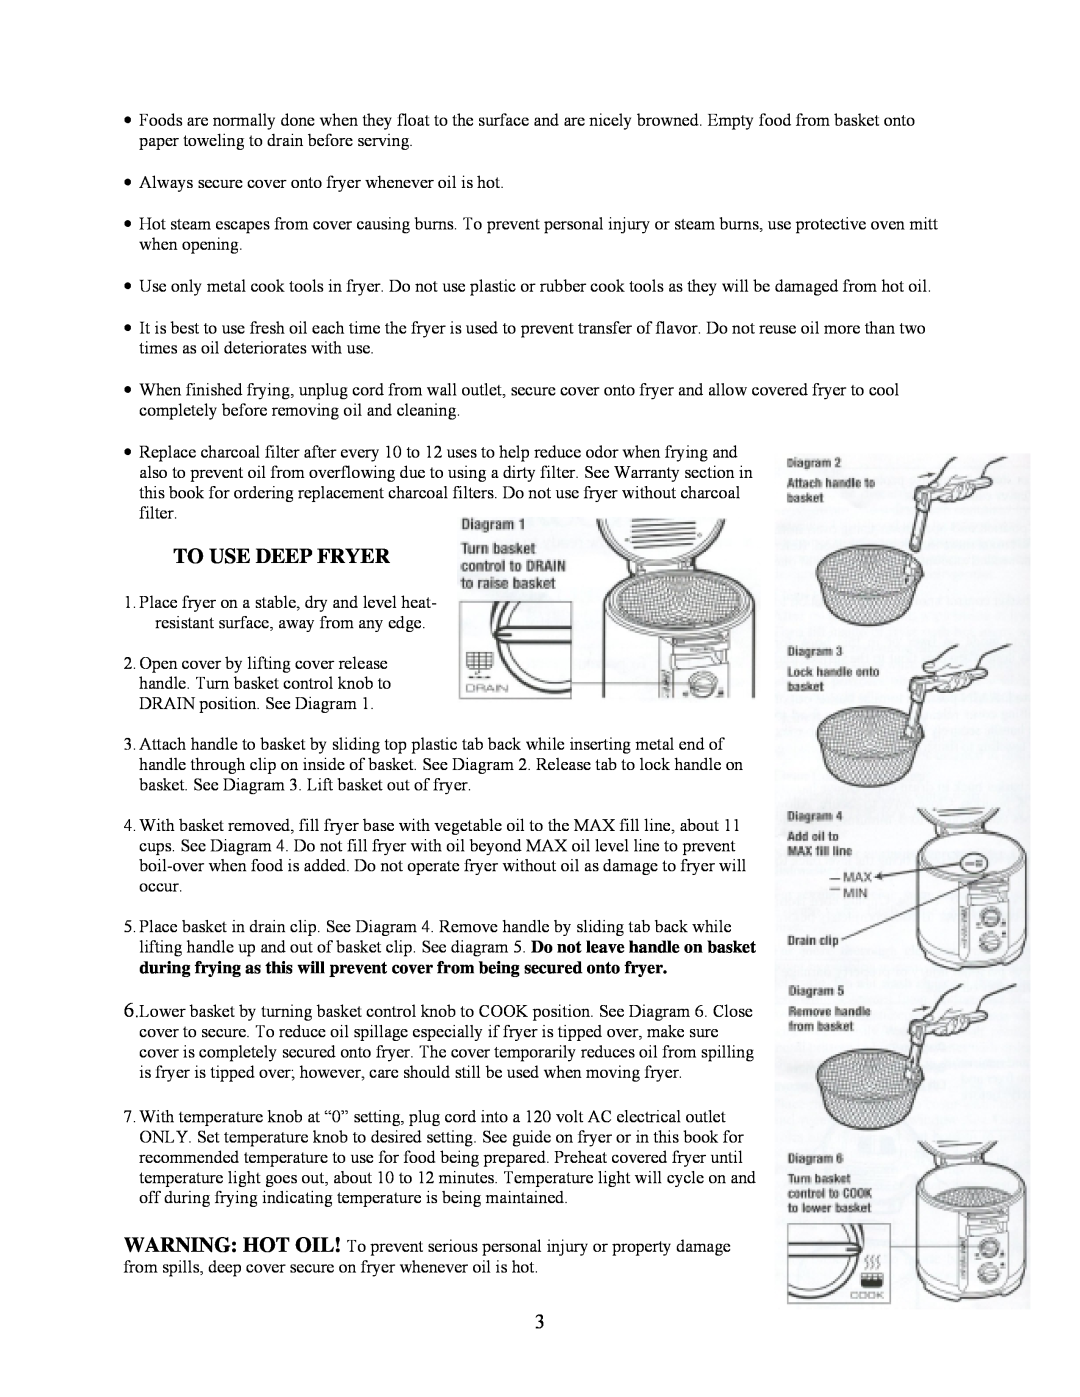 West Bend L5263 instruction manual To Use Deep Fryer 